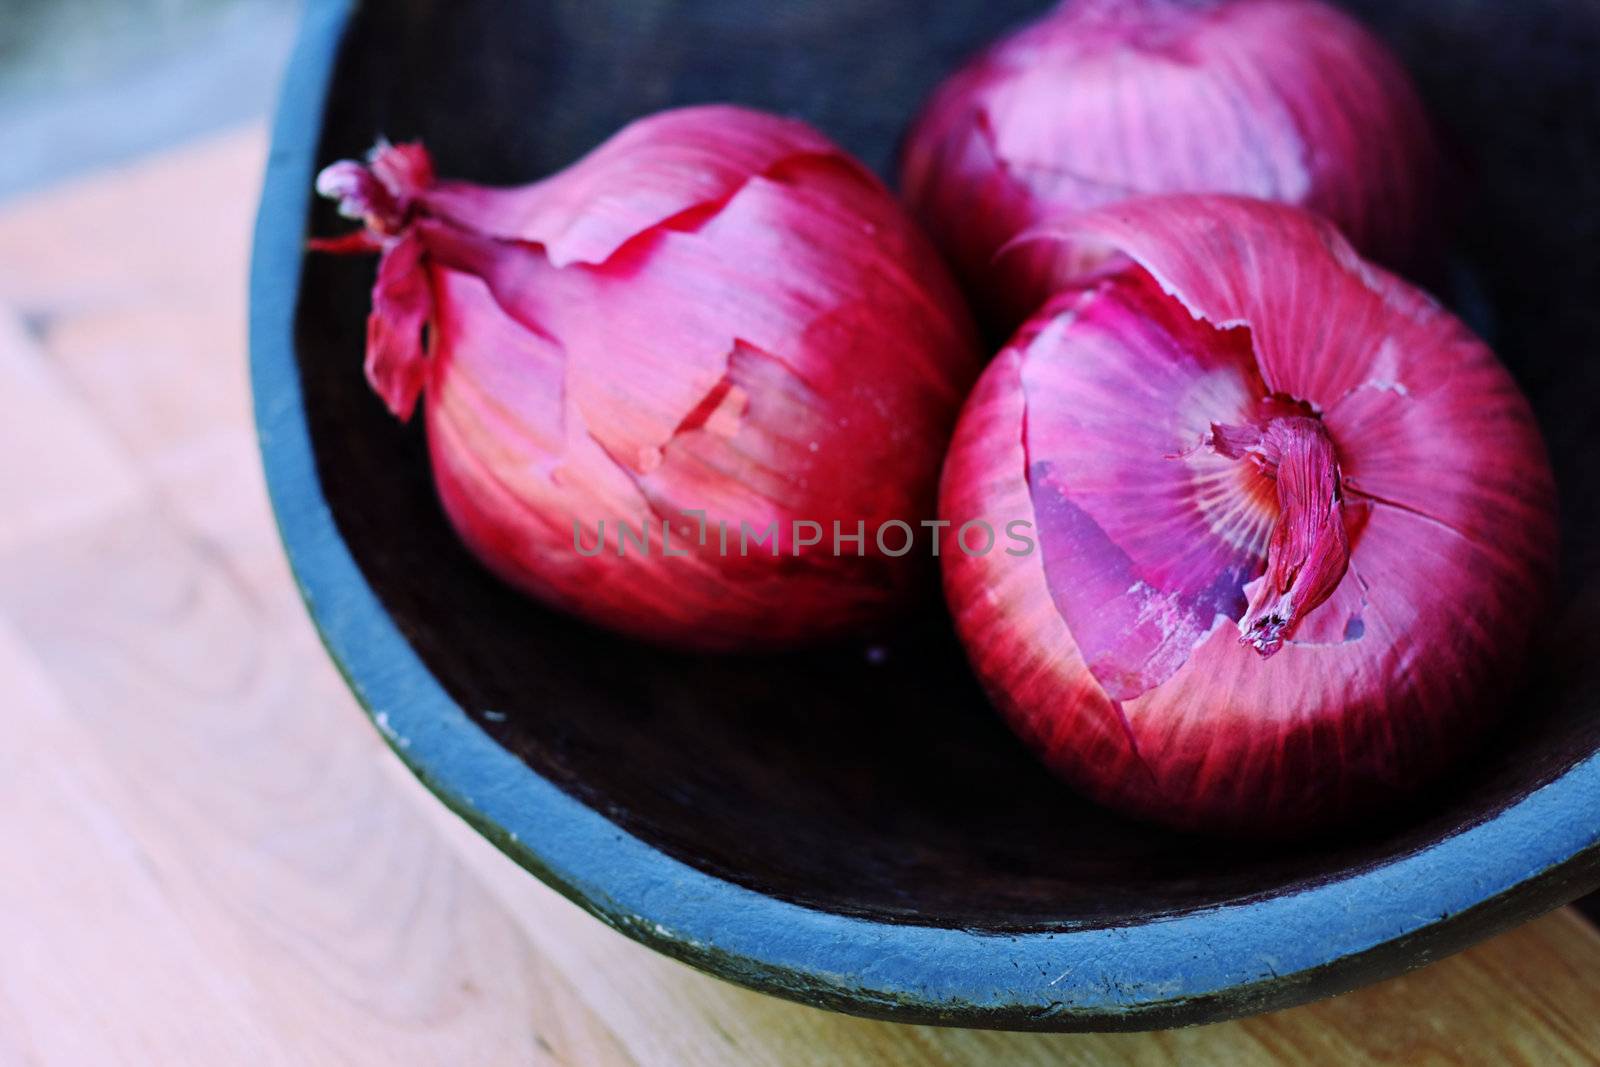 Red onions in a hand carved wooden bowl